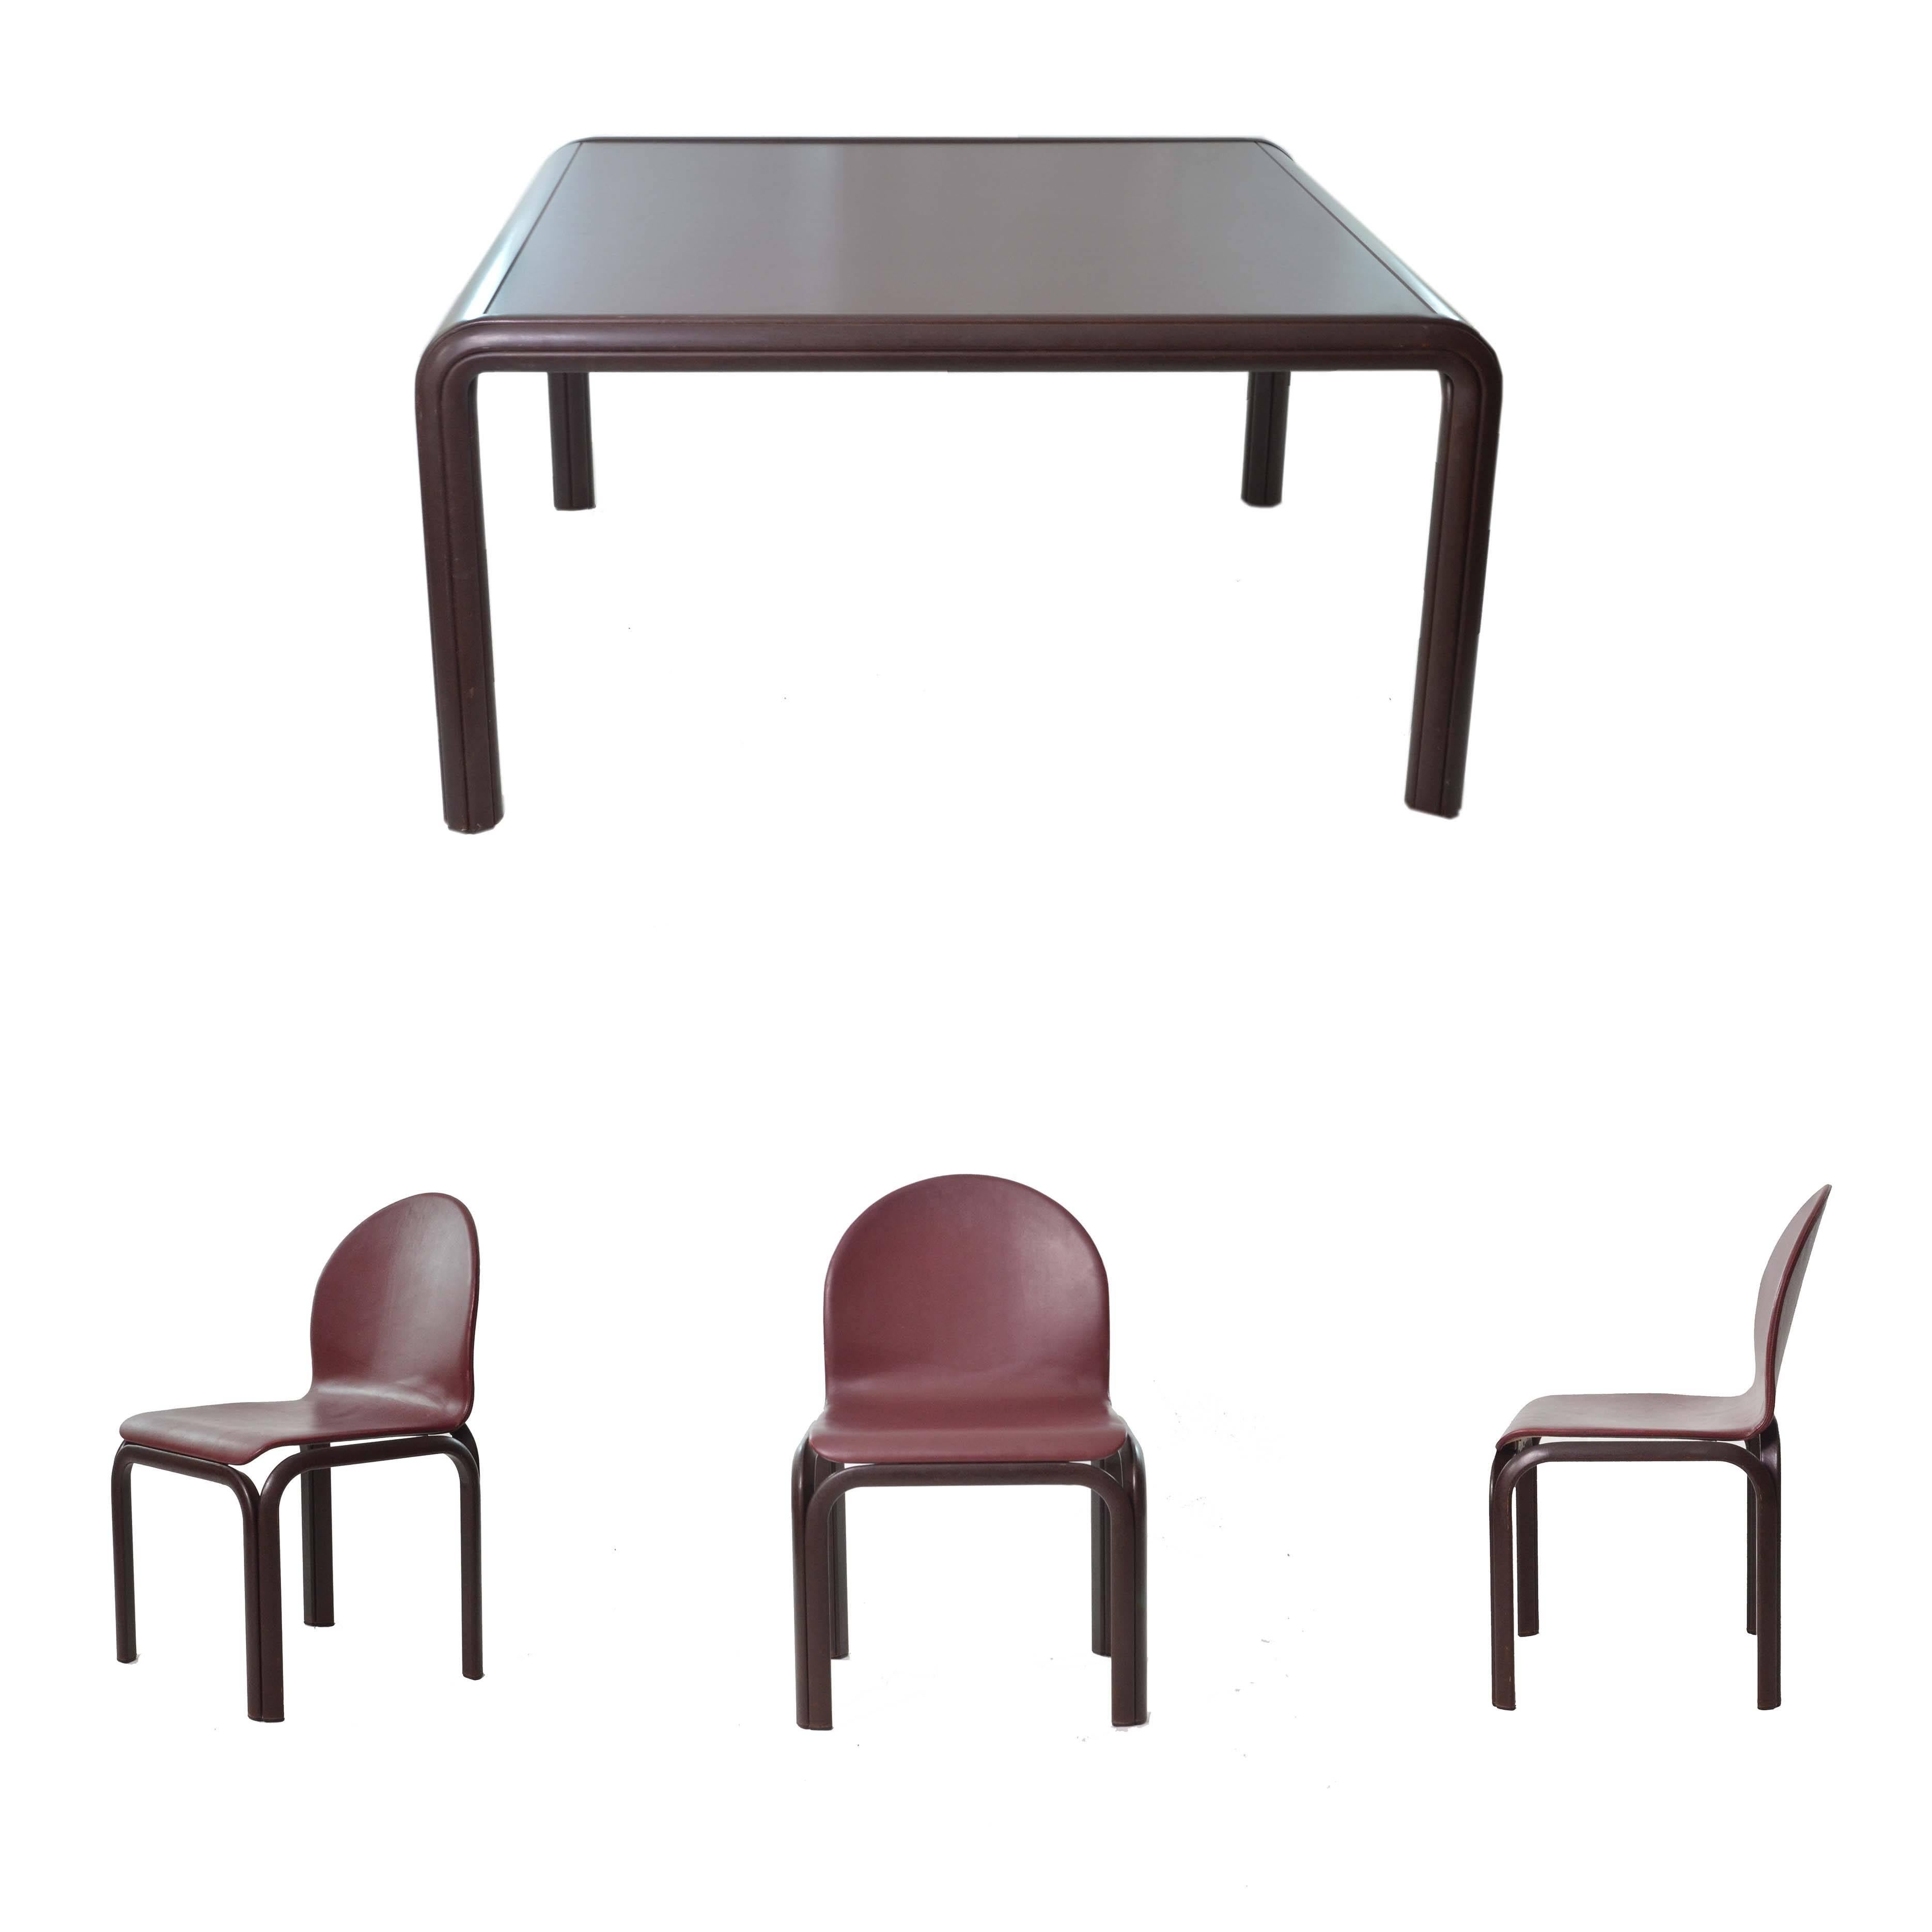 1976 Aluminium Table and four Chairs by Gae Aulenti for Knoll 10